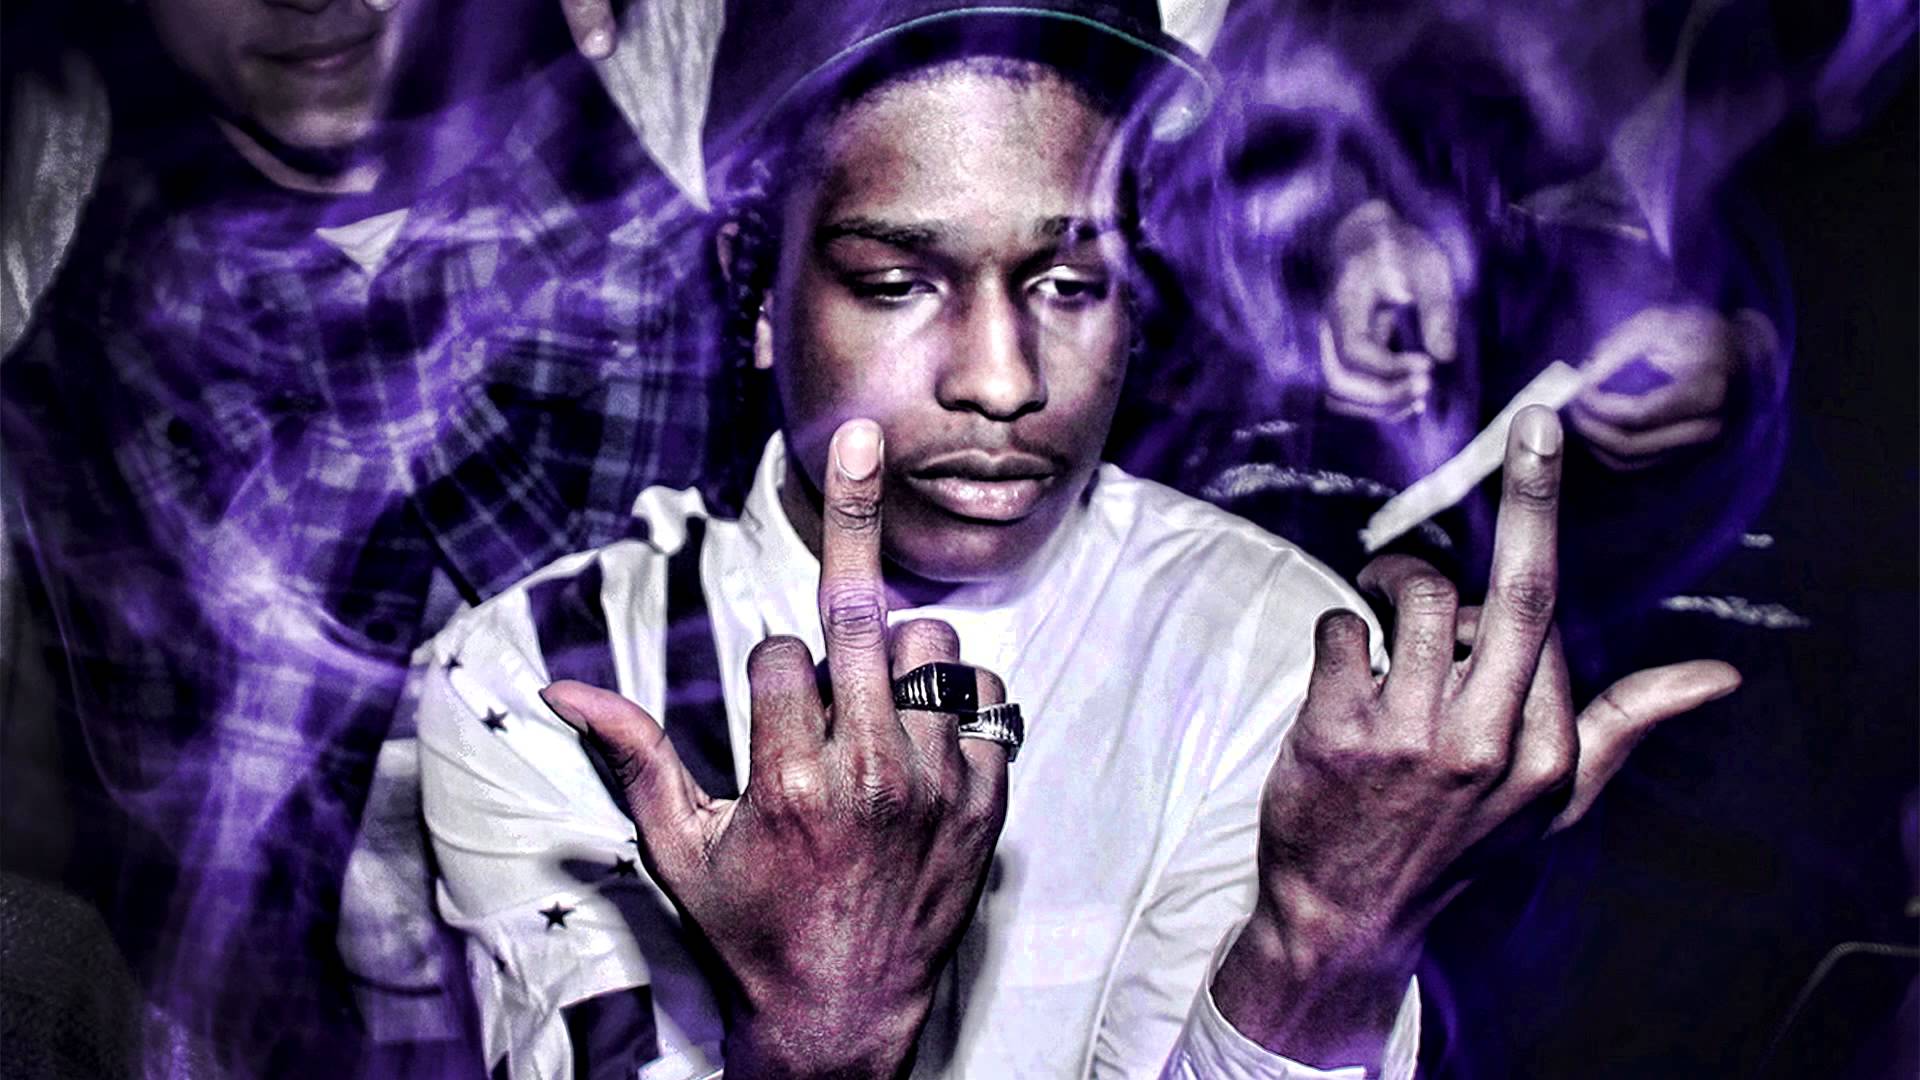 Asap Rocky High Resolution Wallpapers Top Free Asap Rocky High Images, Photos, Reviews